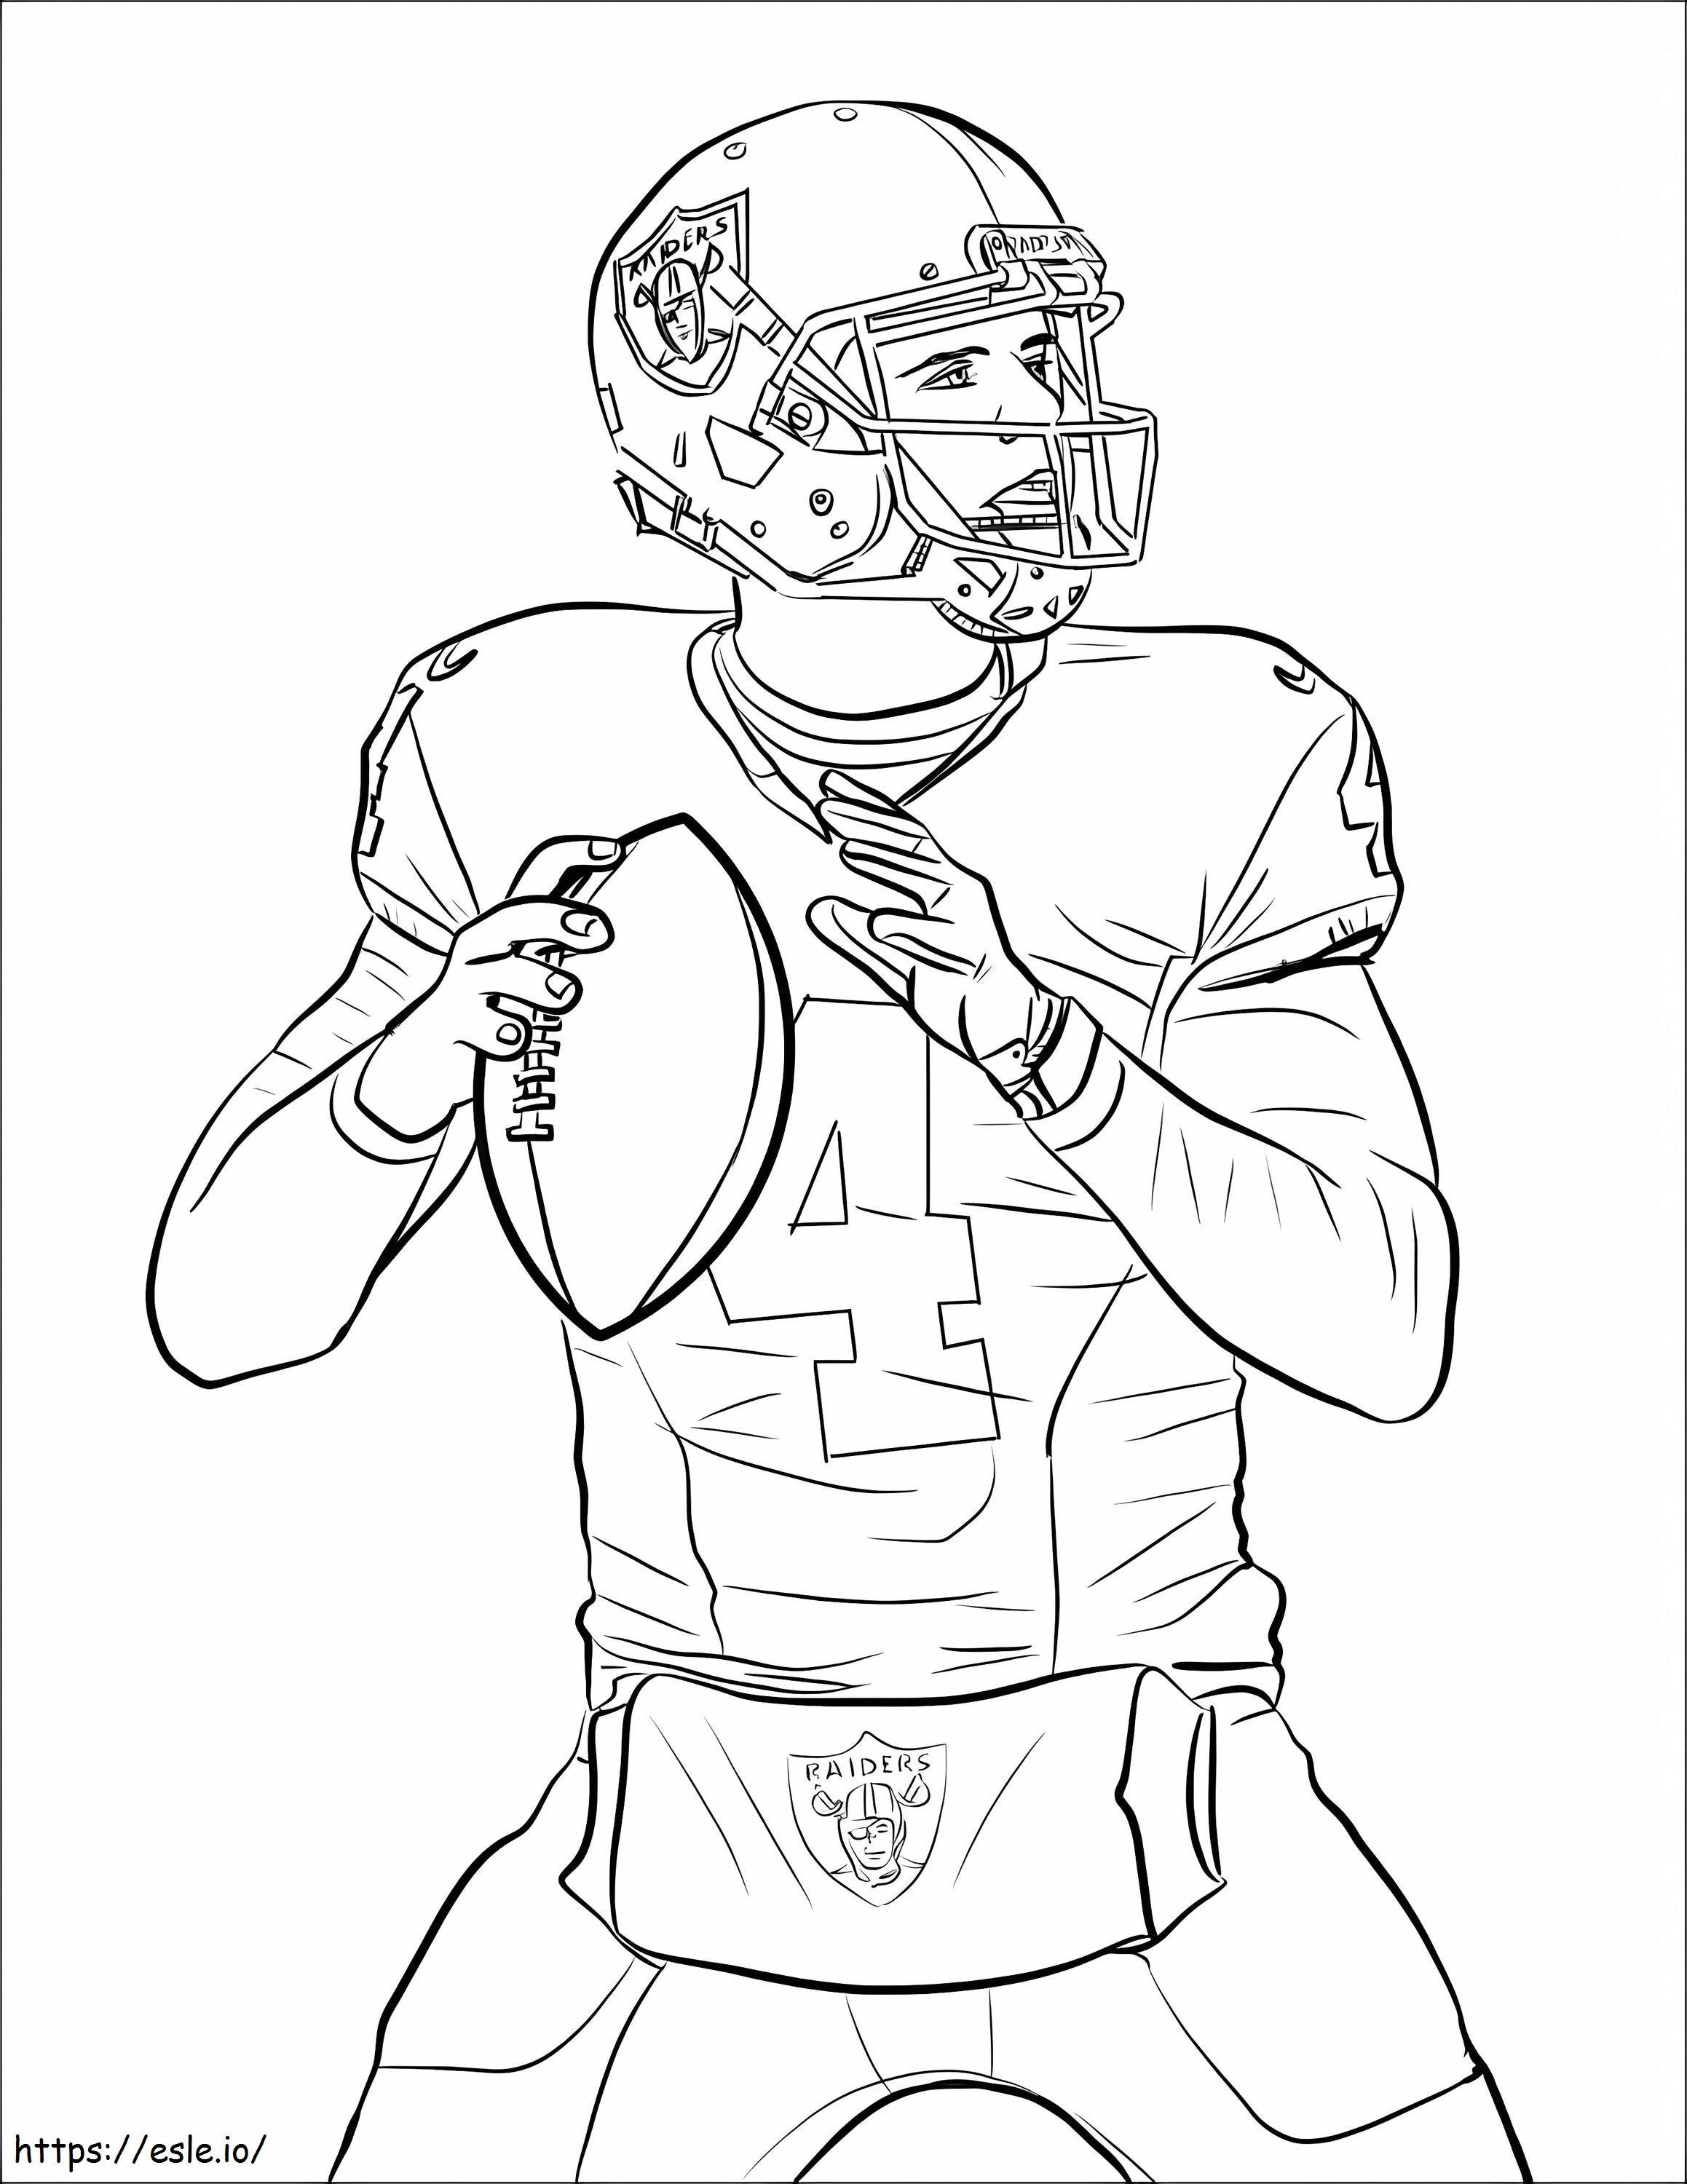 Derek Carr Football Player coloring page